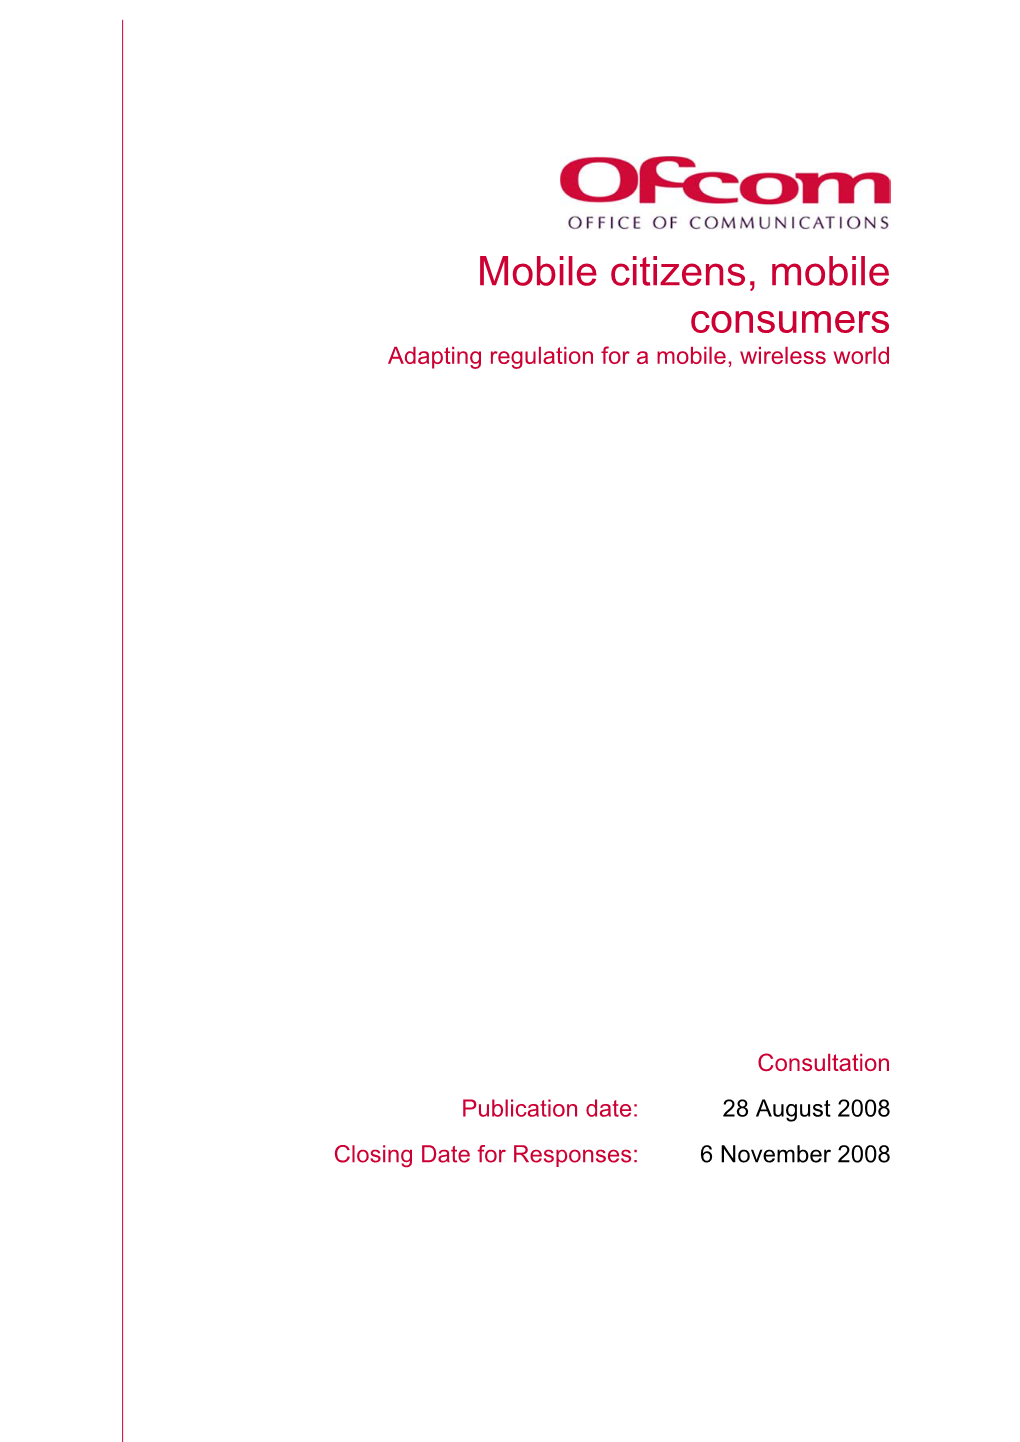 Mobile Citizens, Mobile Consumers Adapting Regulation for a Mobile, Wireless World